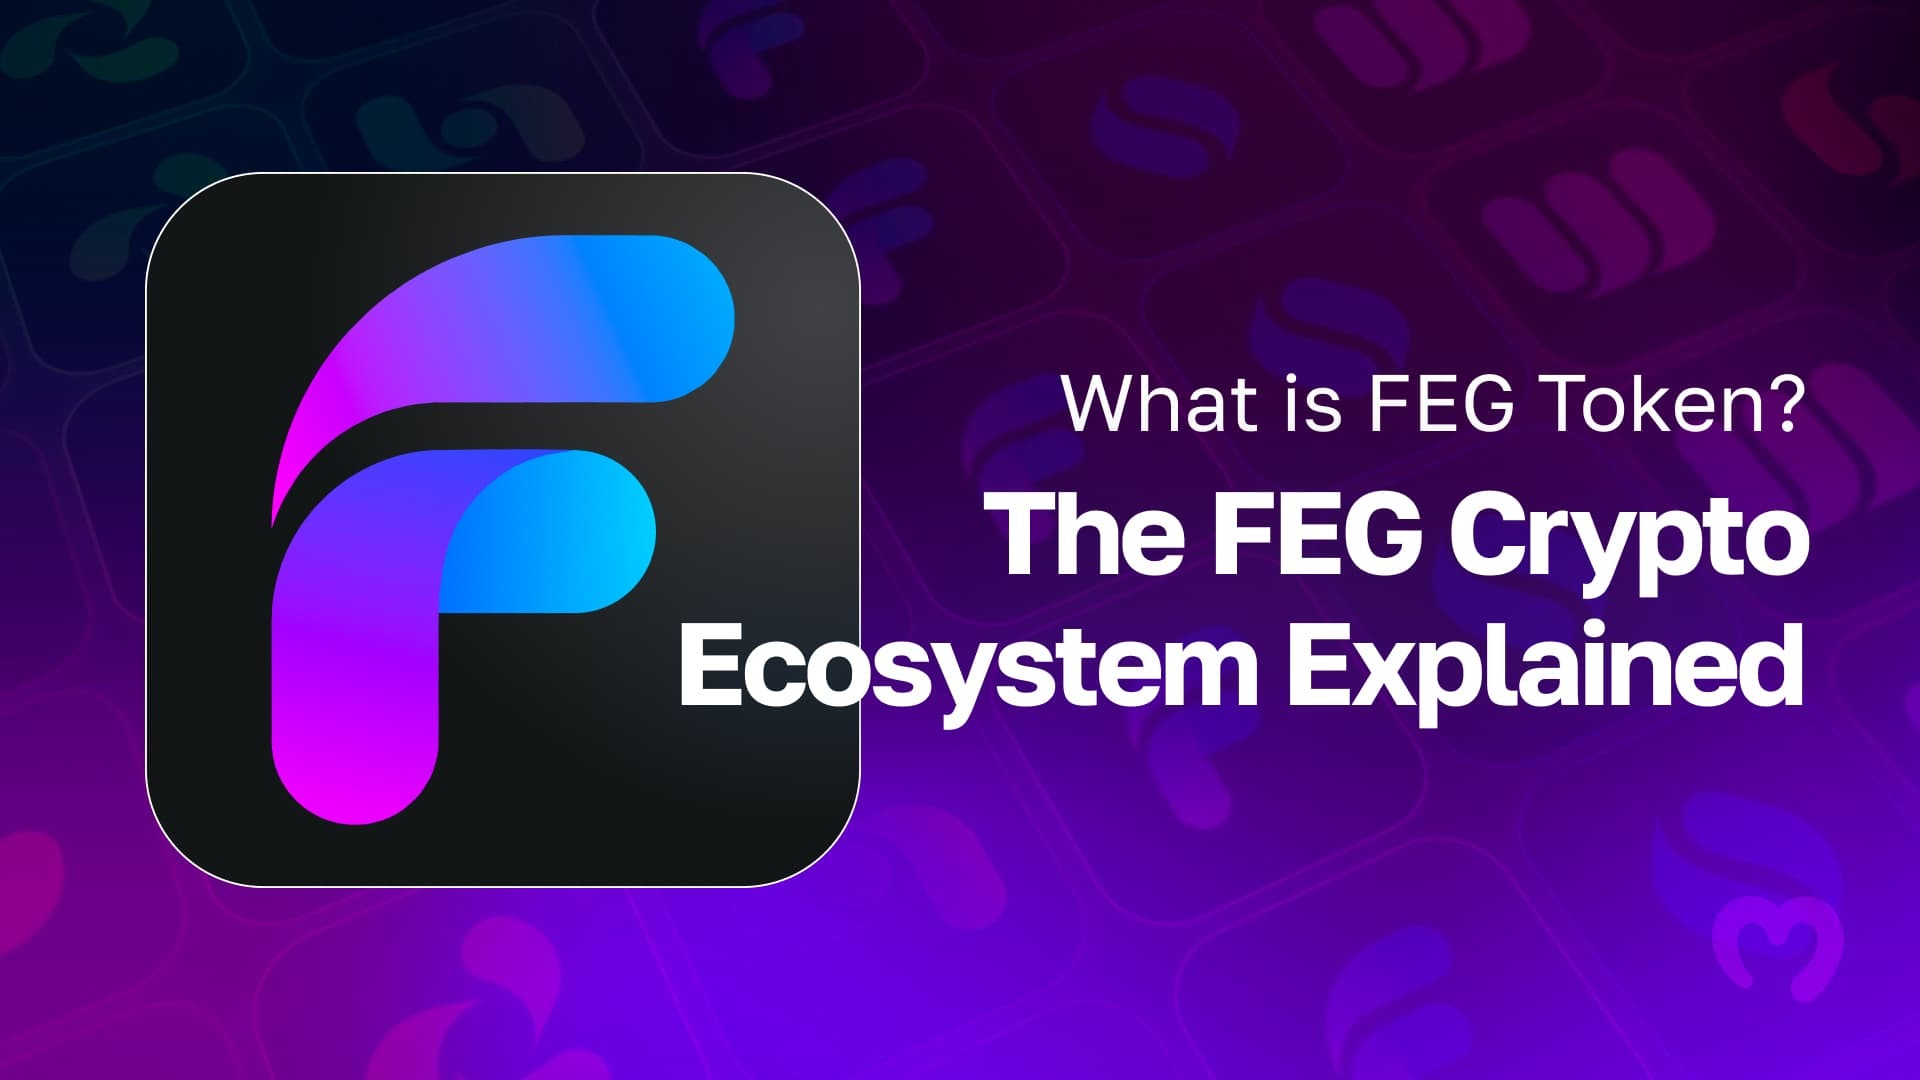 What is FEG Token? The FEG Crypto Ecosystem Explained